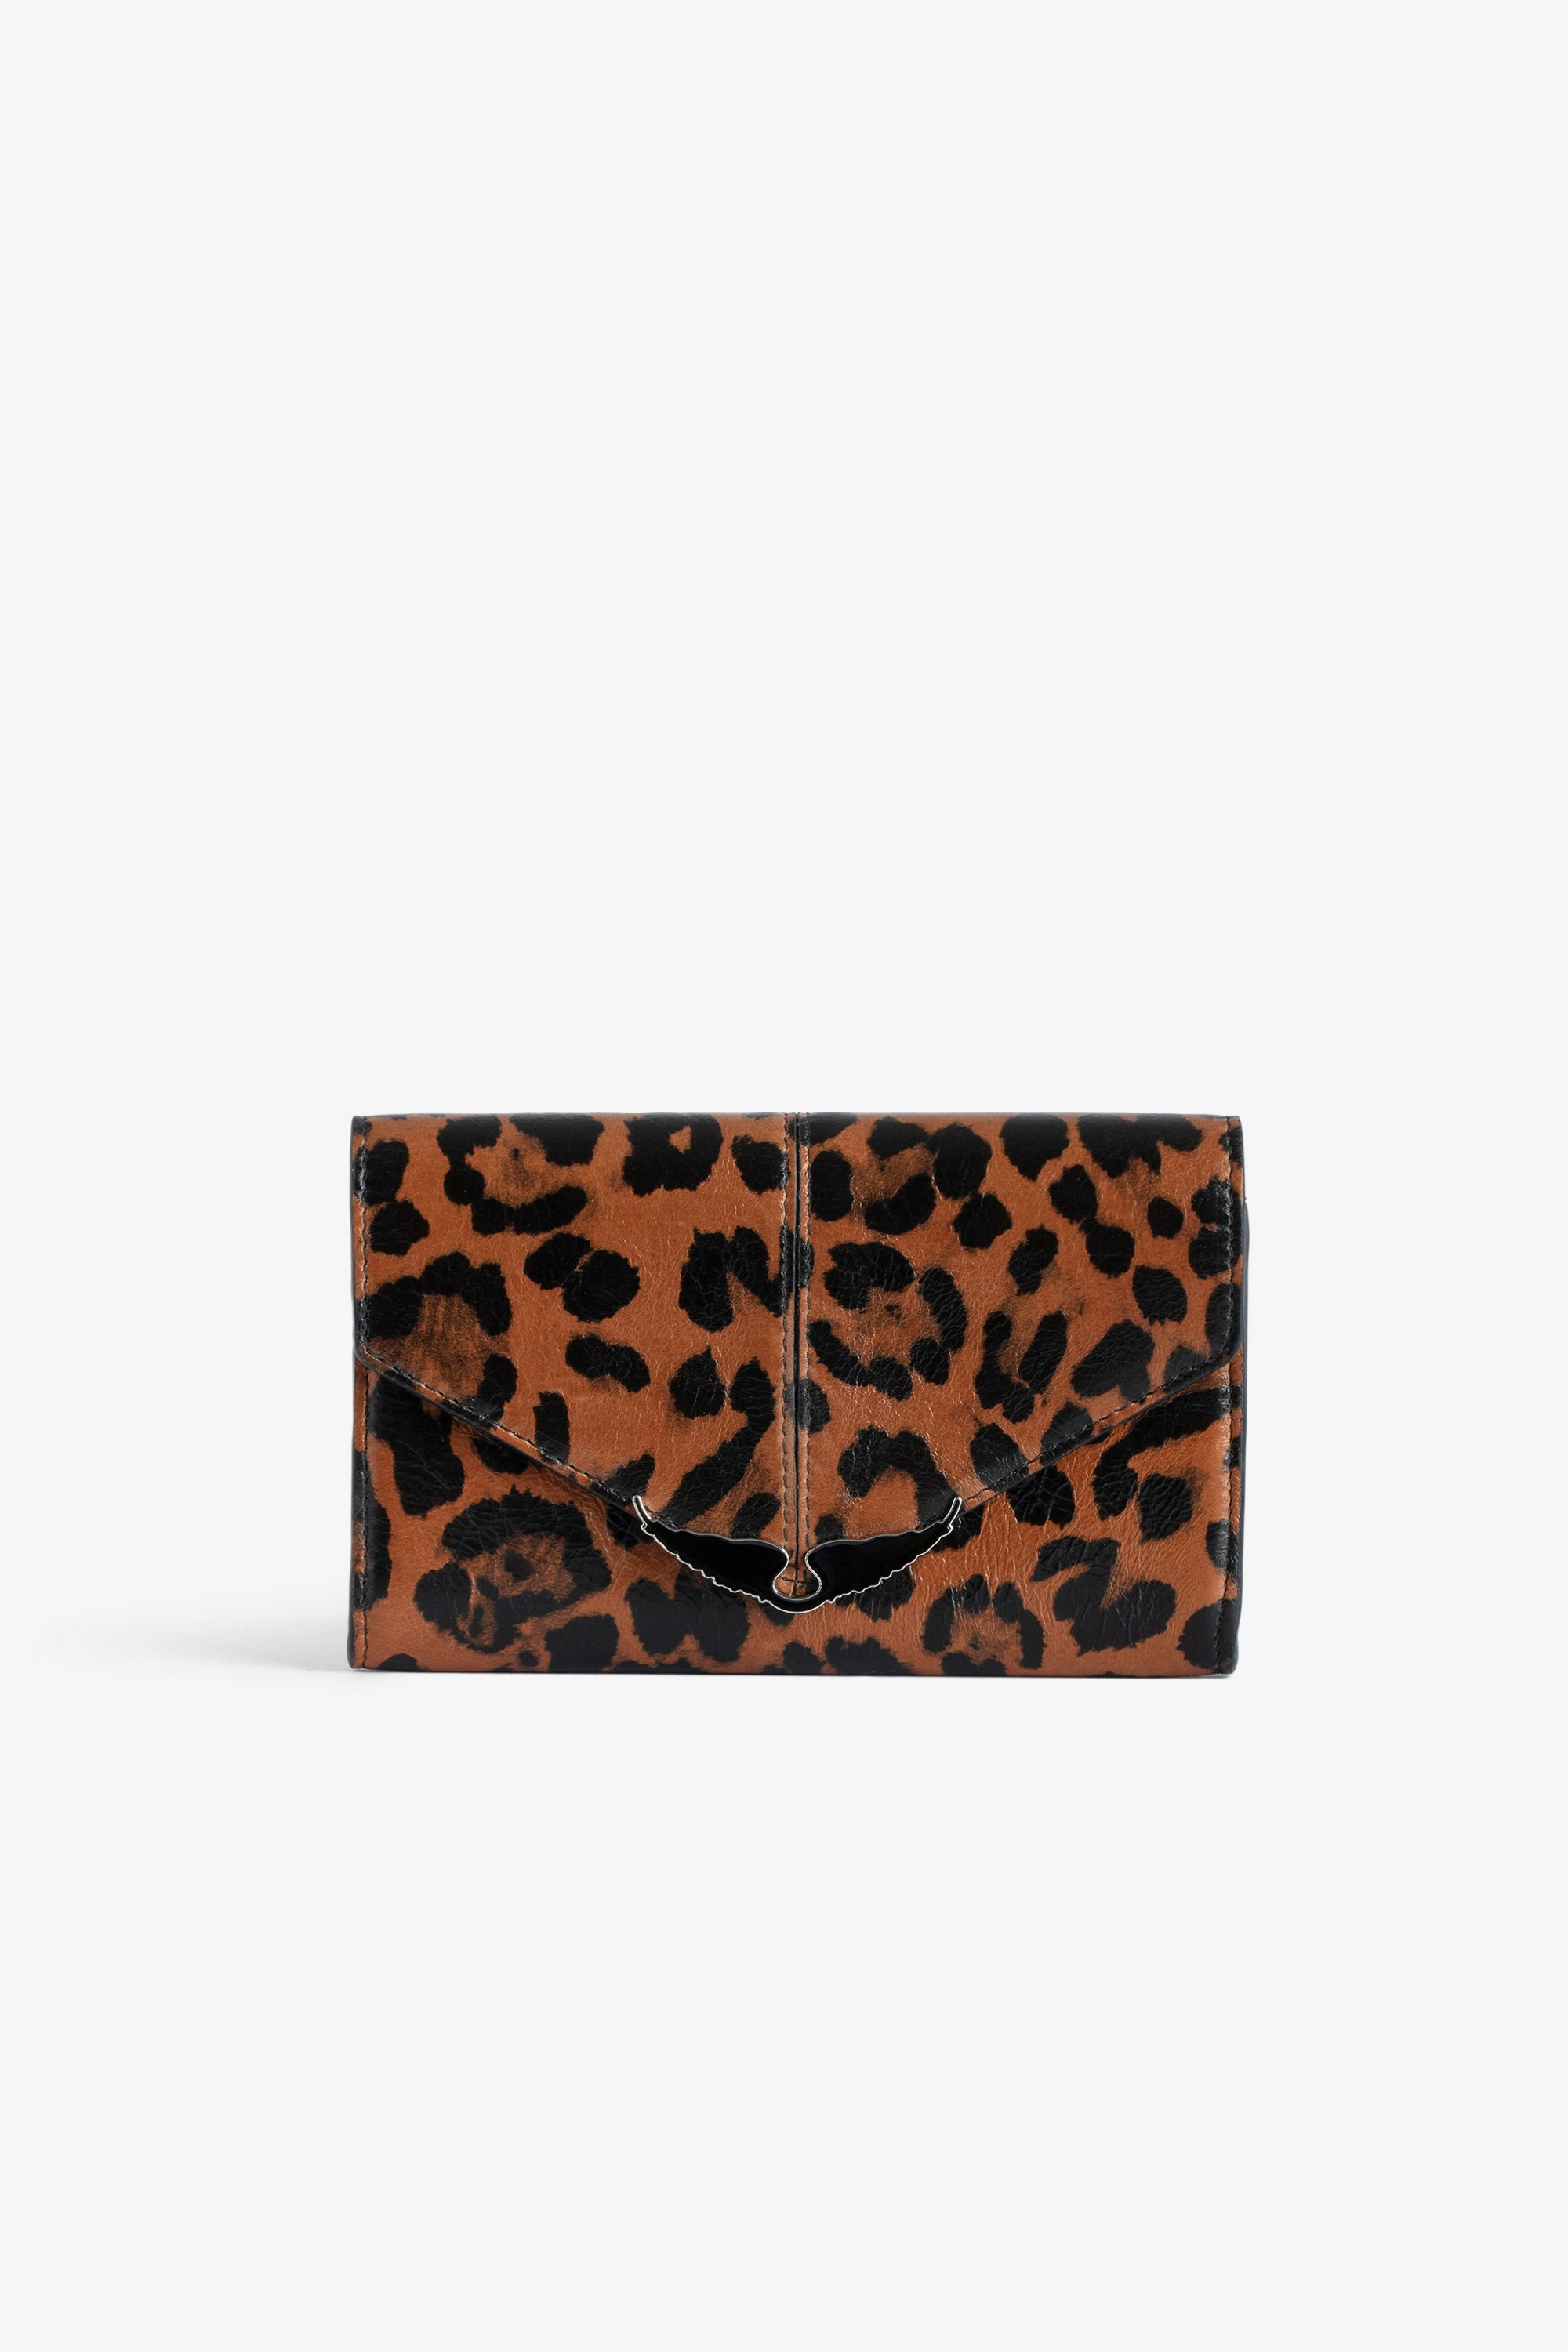 Borderline Wallet - Women’s brown leopard-print patent leather wallet with wings charm.